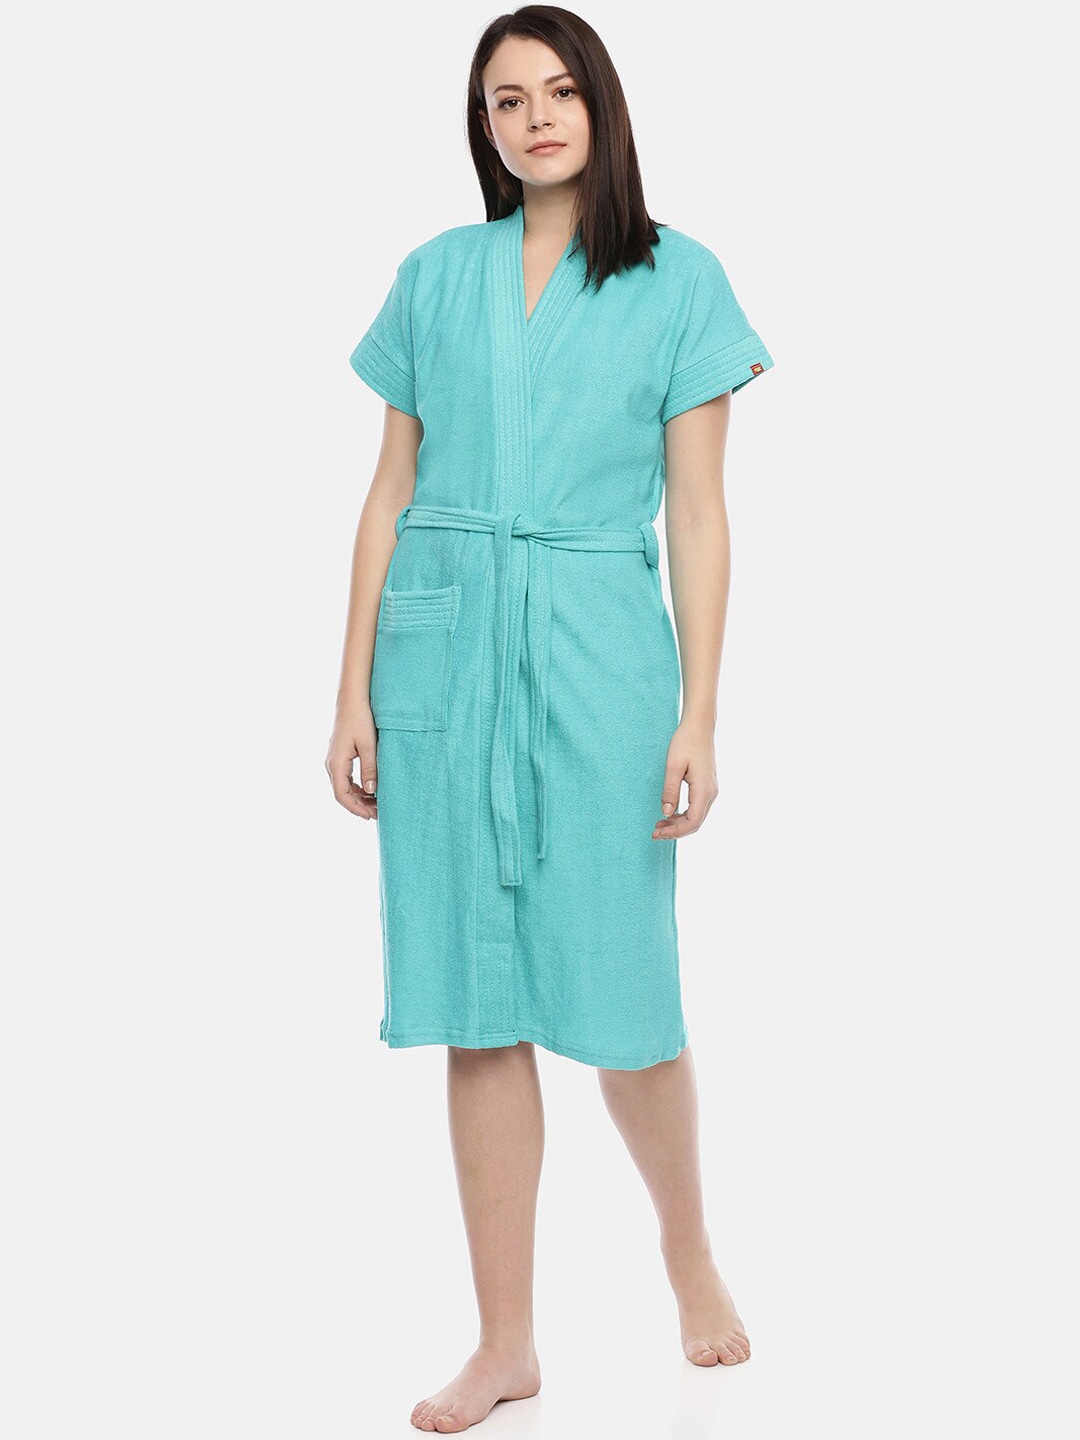 GOLDSTROMS Women Turquoise Blue Solid Cotton Bath Robe Price in India